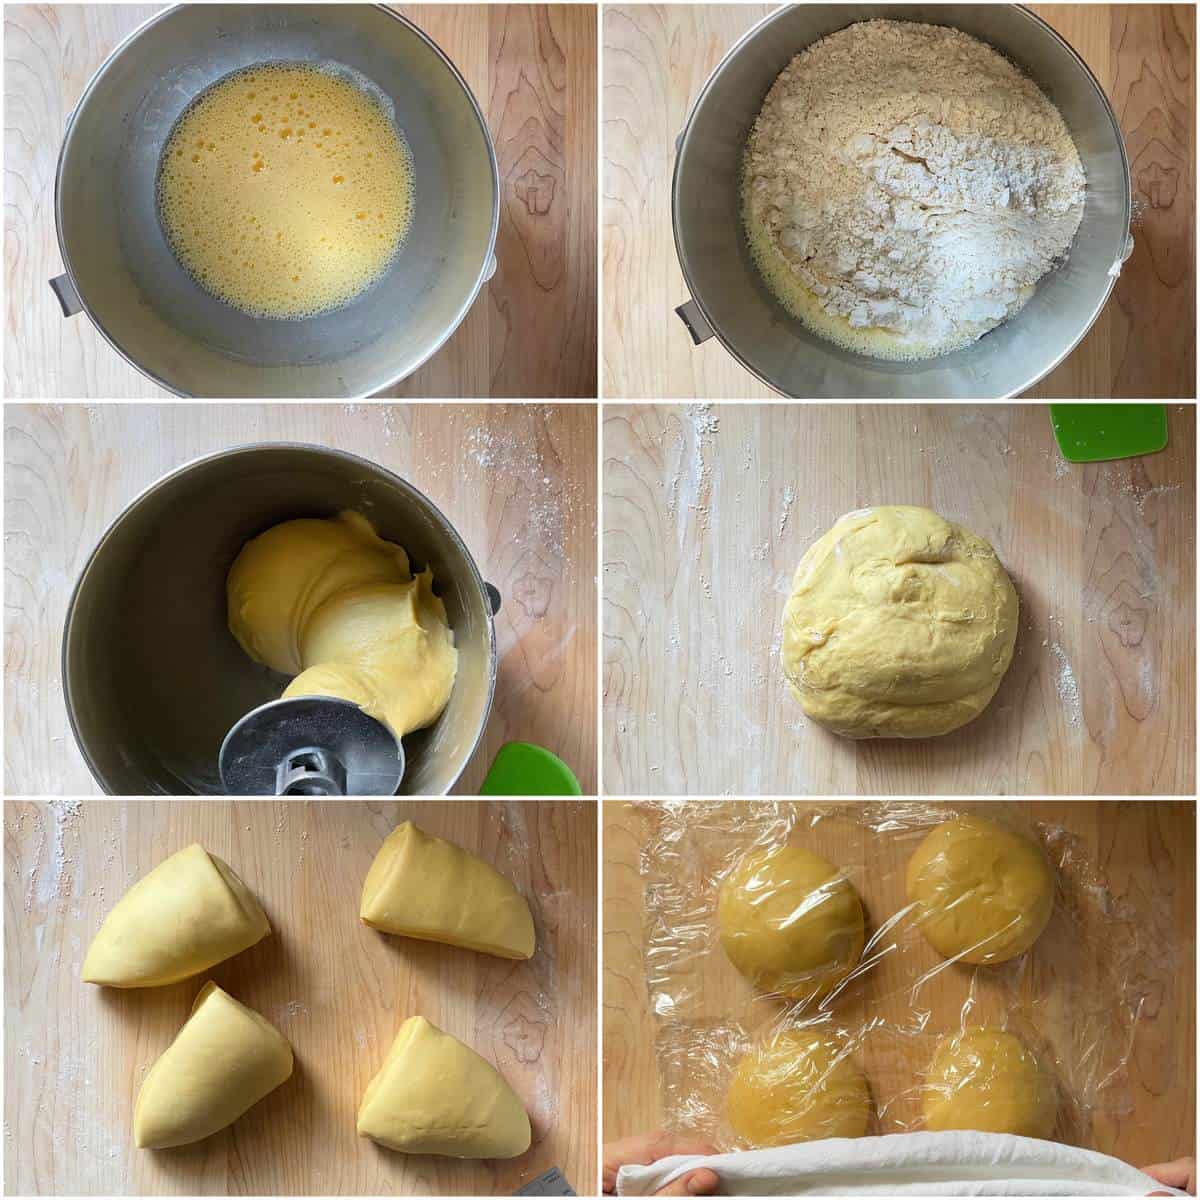 A photo collage of the dough preparation to make savory cheese fiadone.